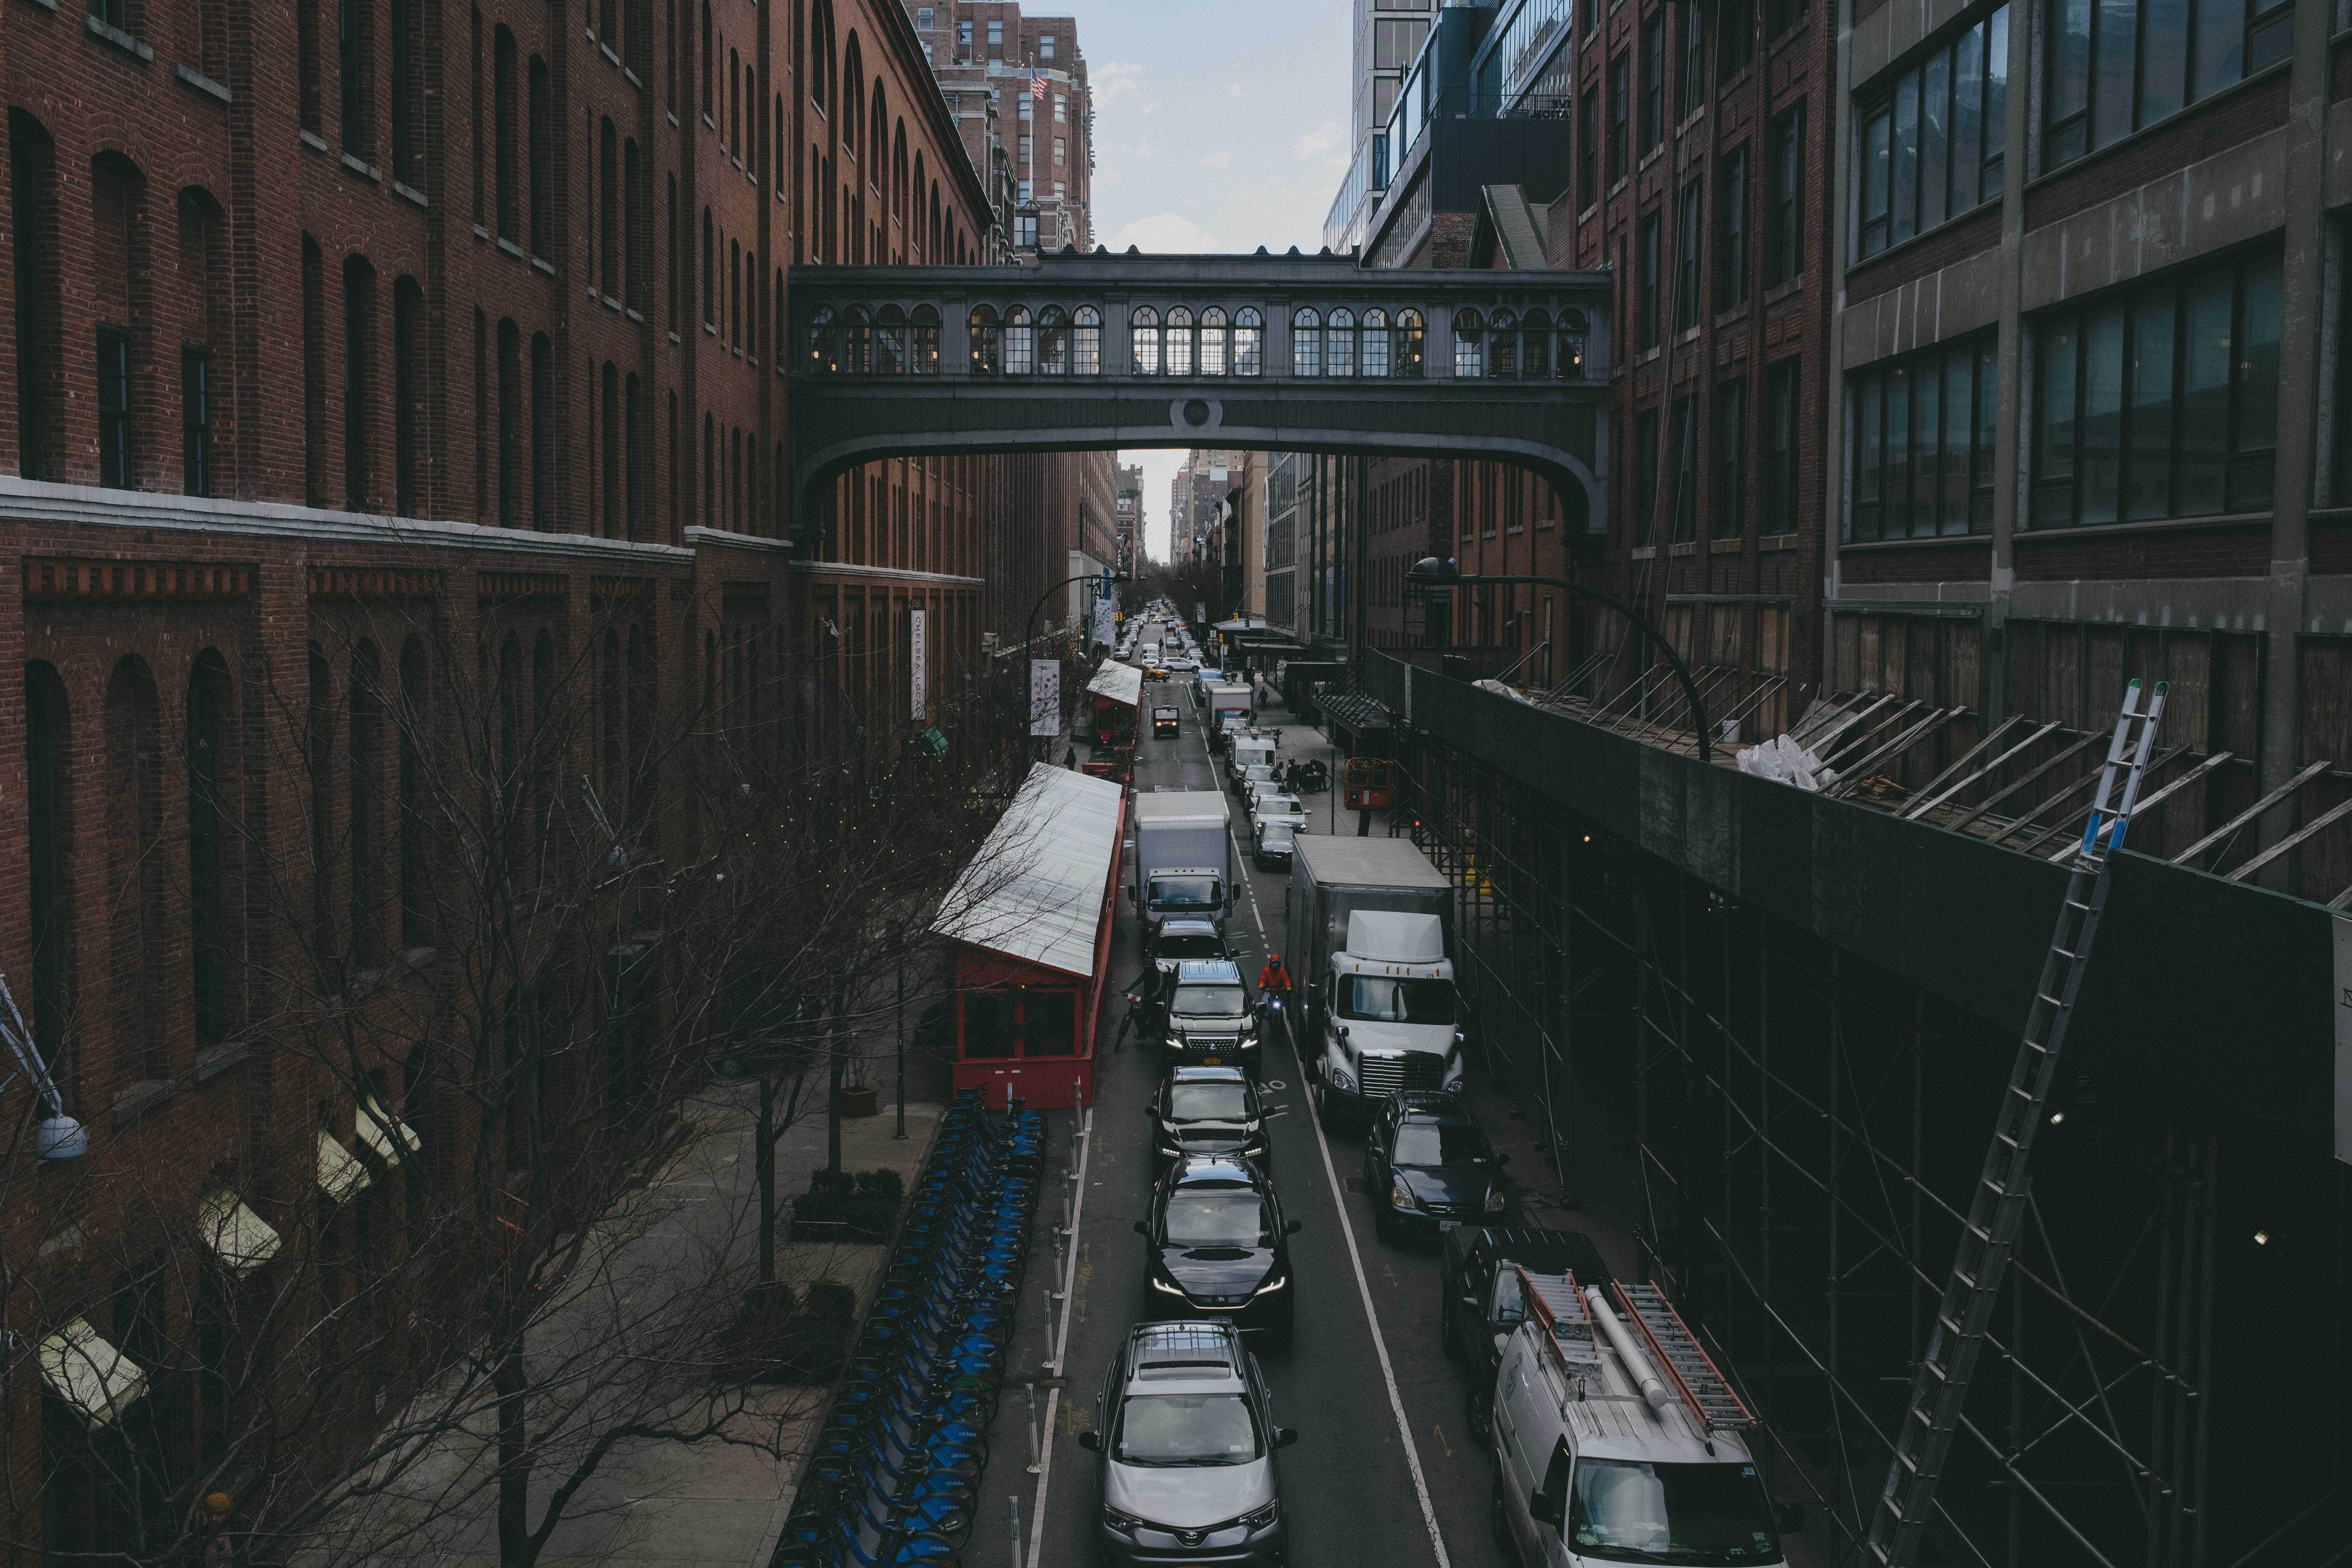 The street as seen from the High Line